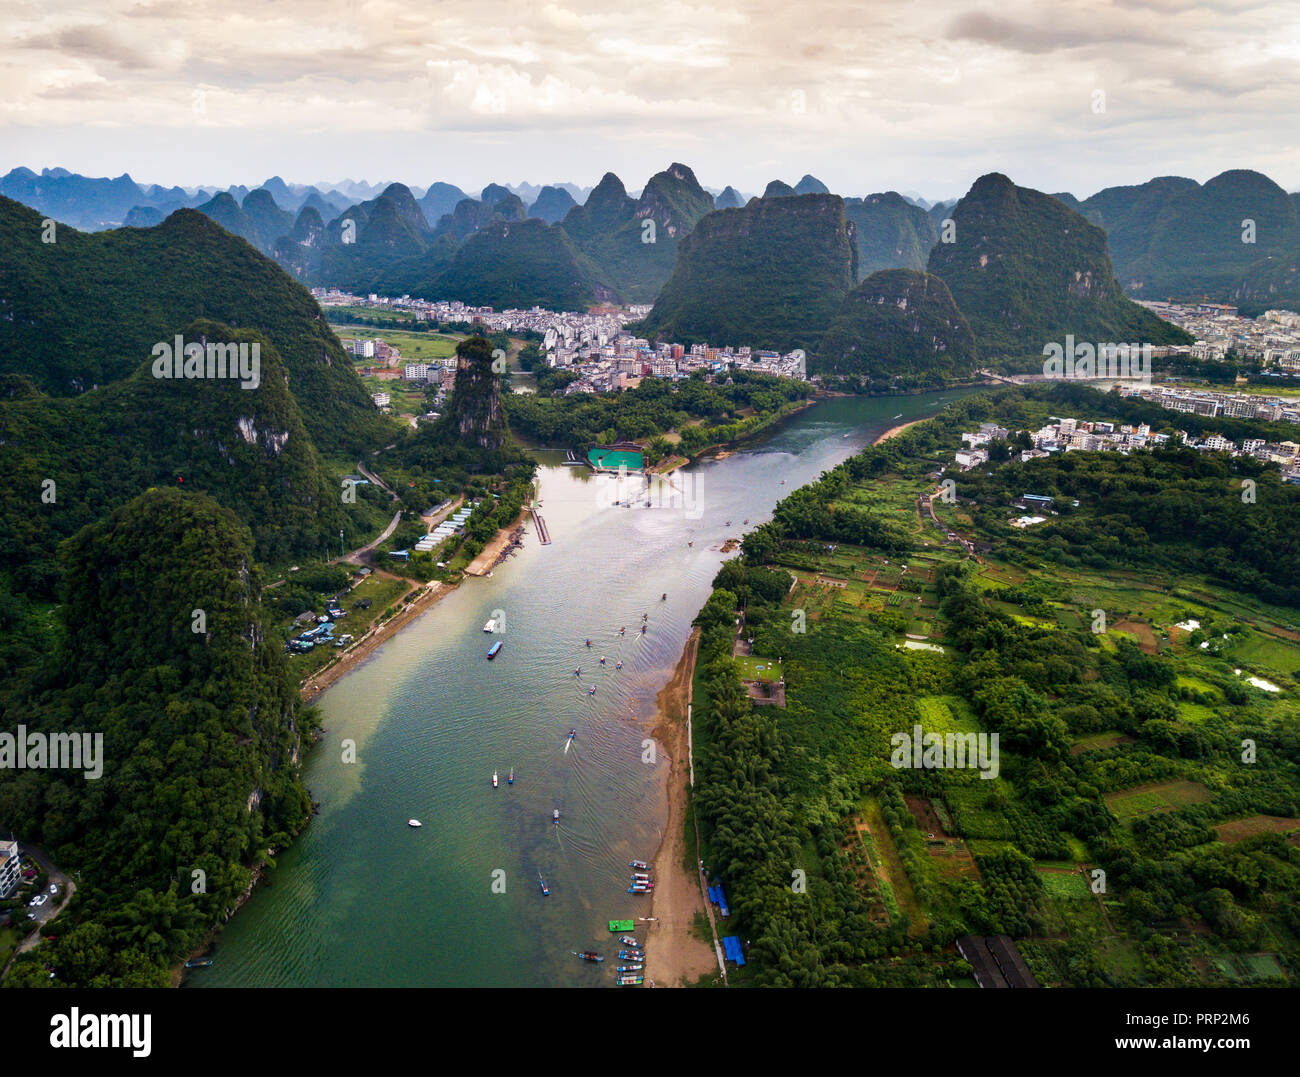 Yangshuo county and Li river in Guilin, China aerial view Stock Photo